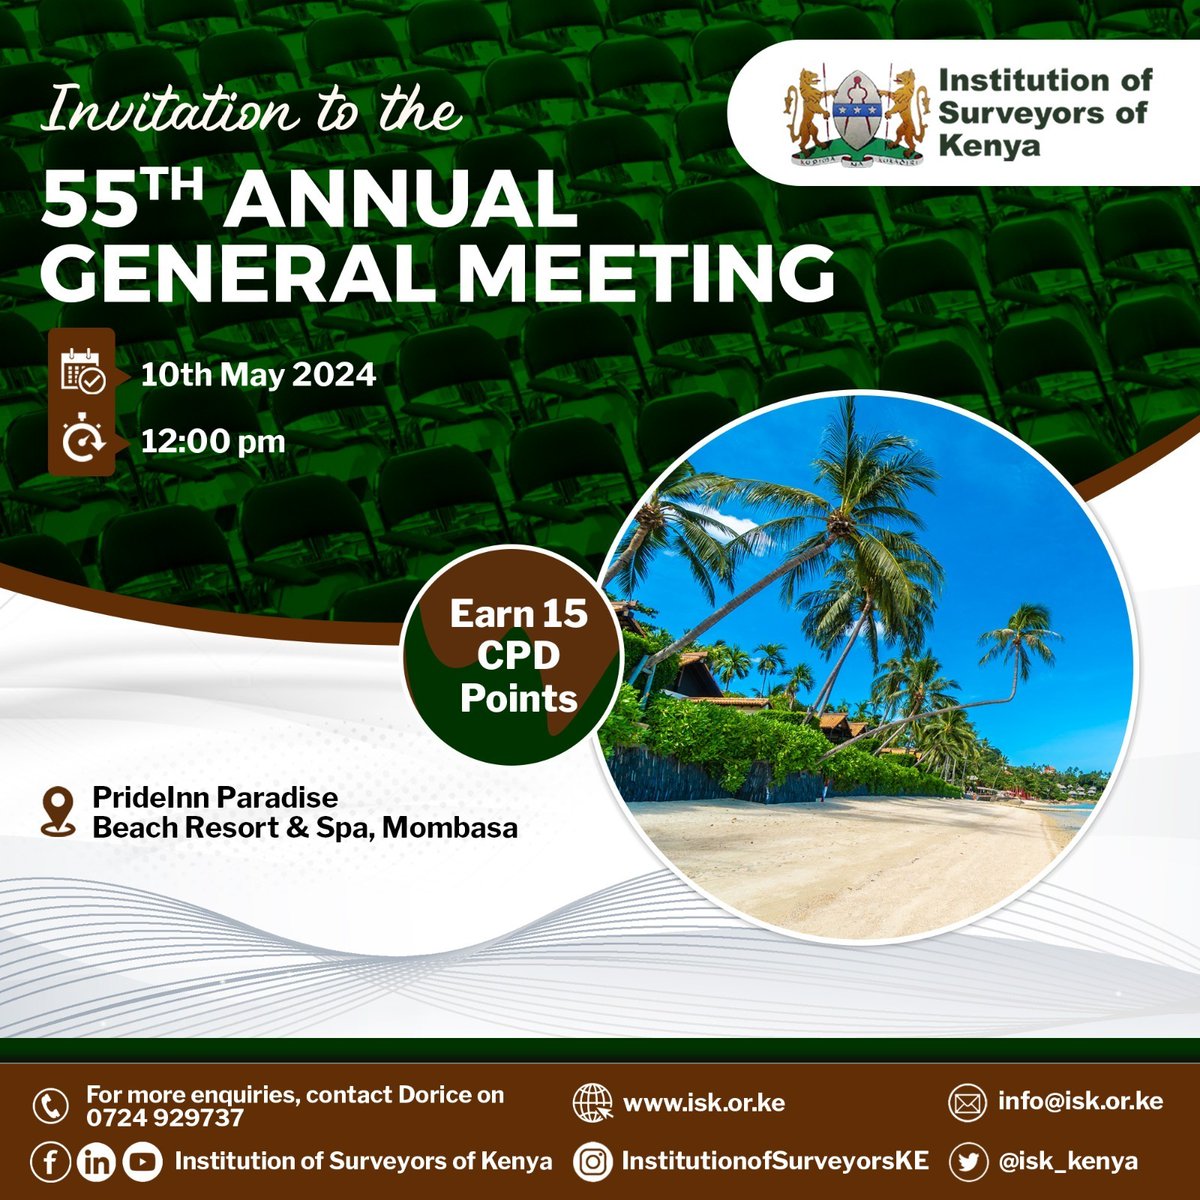 The Institution of Surveyors of Kenya (ISK) is gearing up for the 55th AGM on 10th May 2024 and we want YOU to be there! Whether you're a seasoned professional or new to the field, this event is for you. Register today and be part of the momentum! #ISKenya #AGM